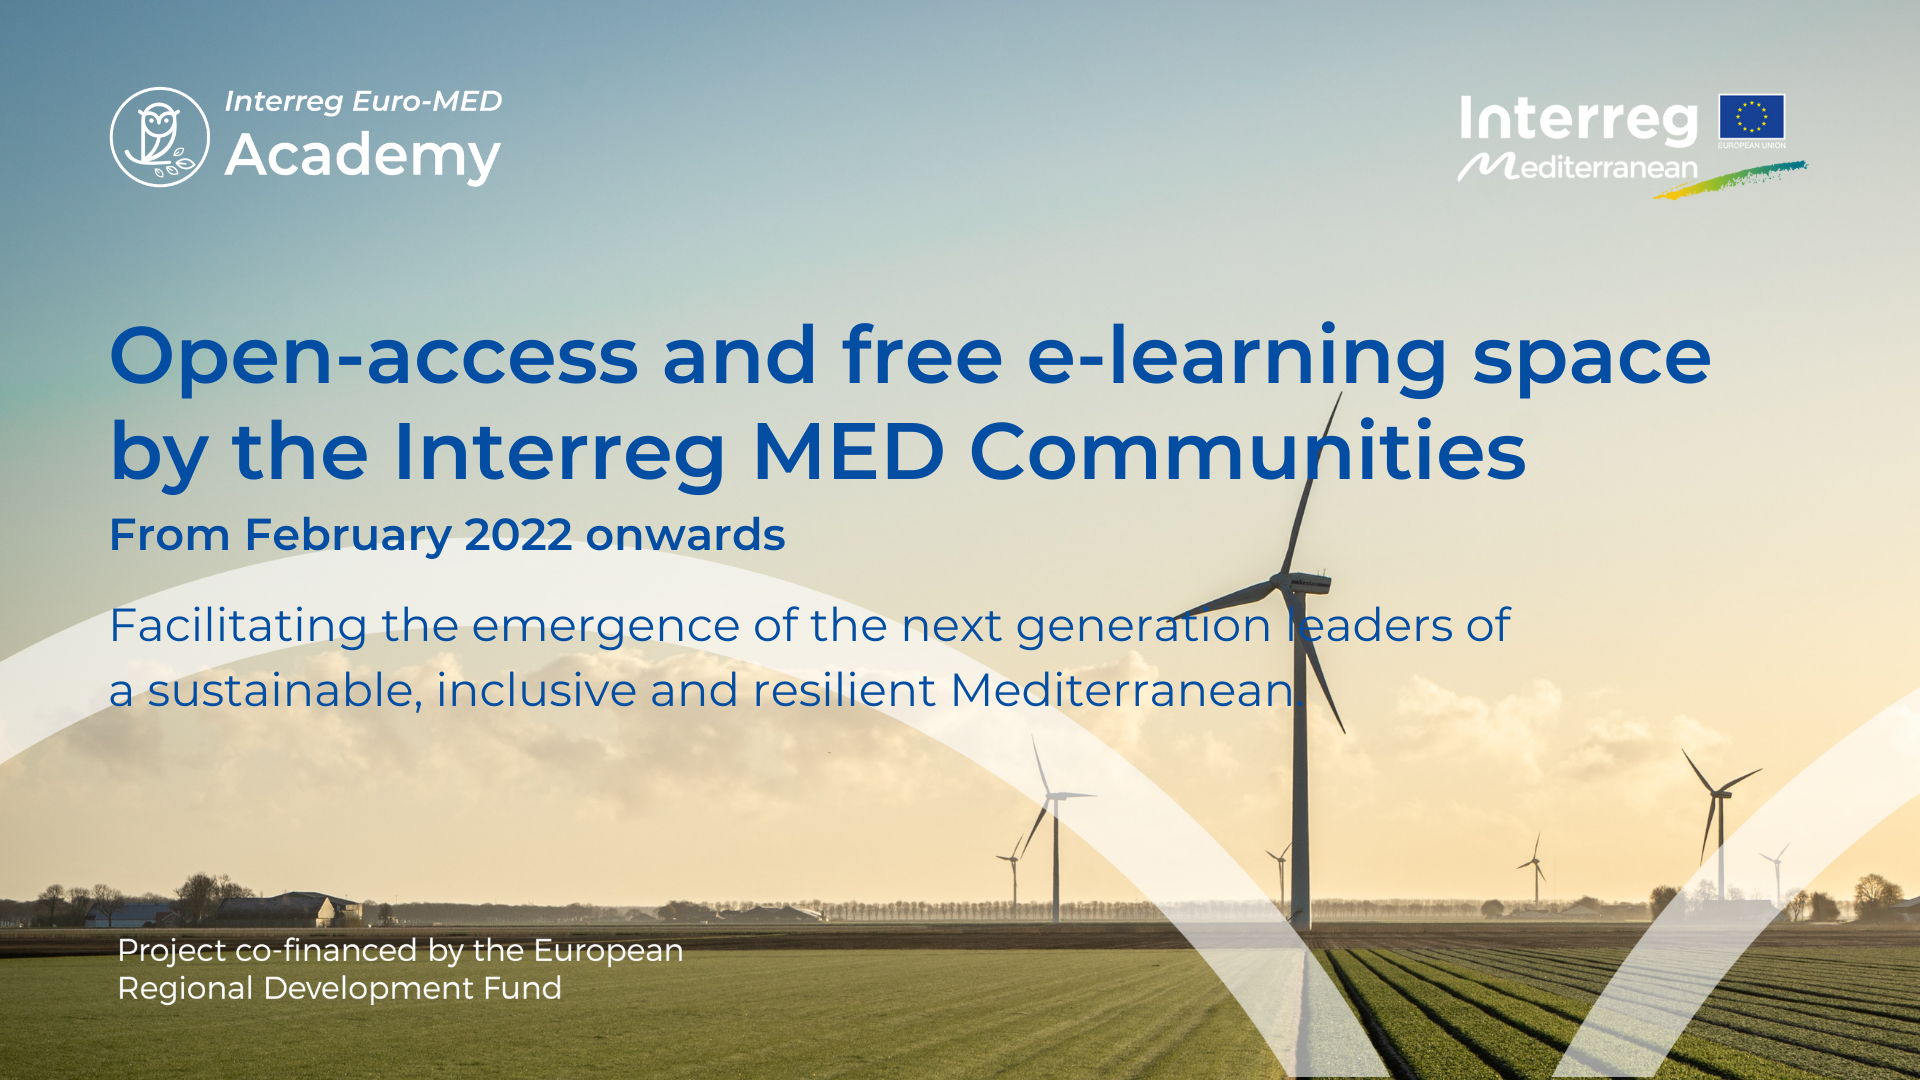 The Interreg Euro-MED Academy opens its doors!  A free open-access e-learning space by the Interreg MED Communities